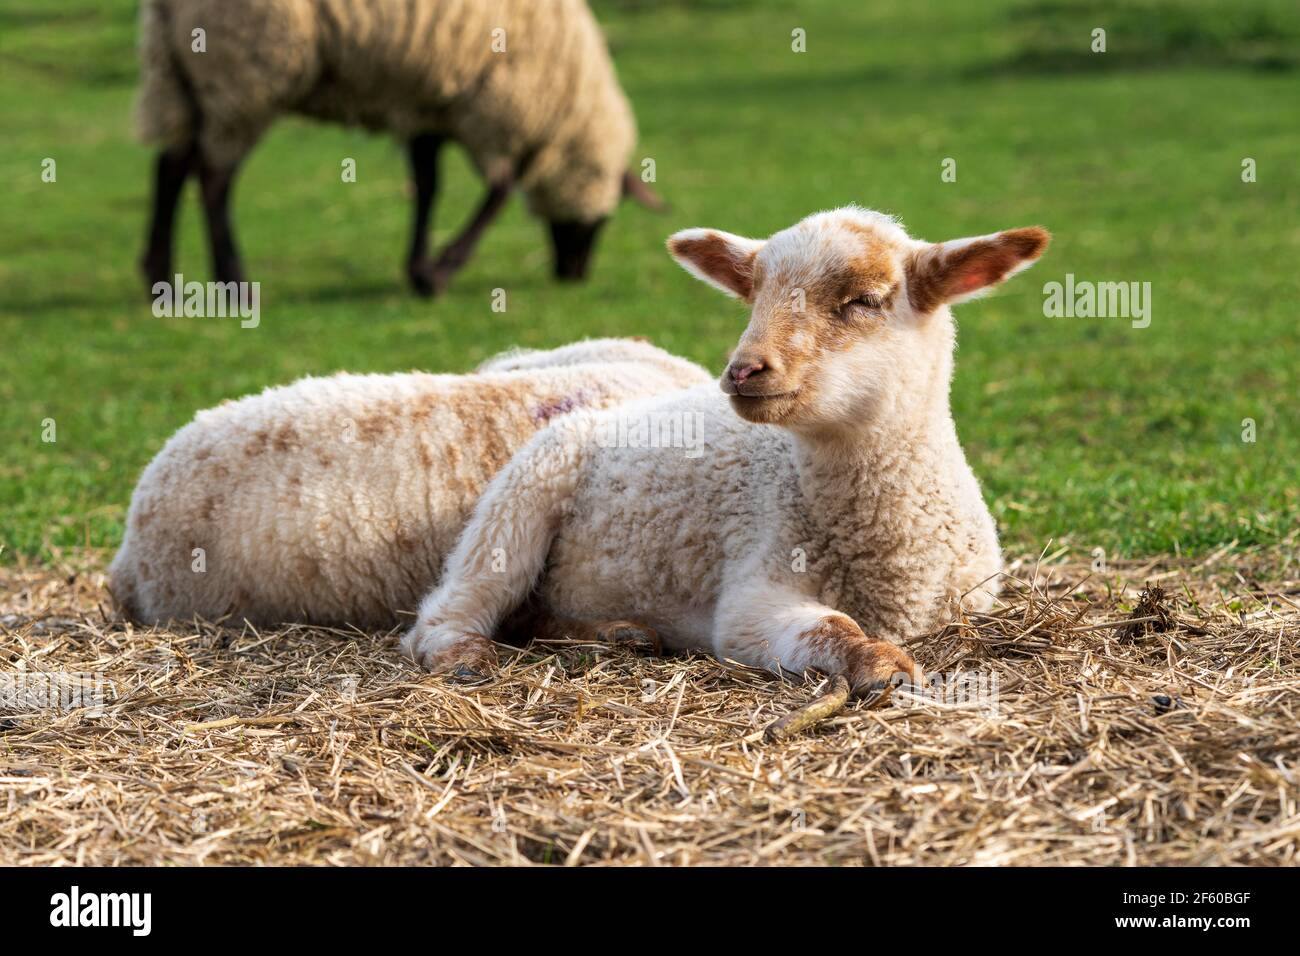 Close-up portrait of a tired looking white and brown lamb with half closed eyes sitting on straw on a green meadow. Concept of free-range farming. Stock Photo